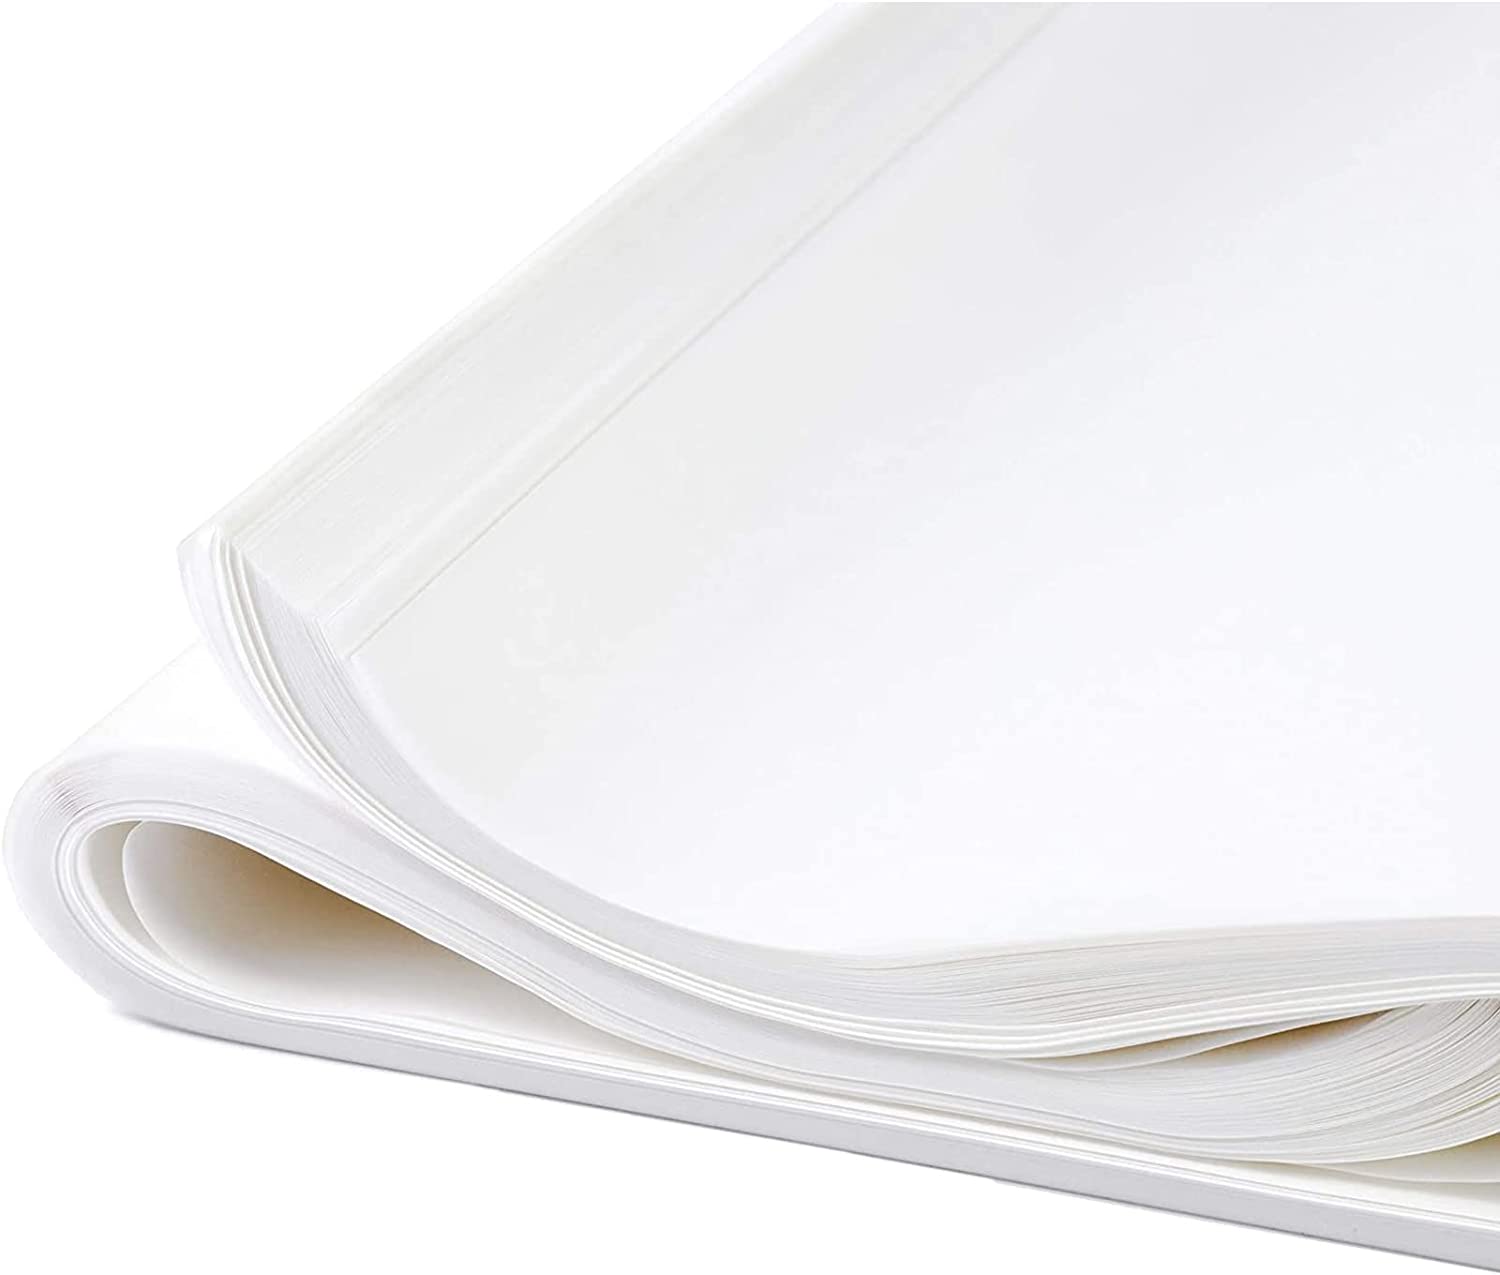 100 Sheets Glassine Paper for Artwork, Protecting Photos, Documents, Baked Goods (16 x 20 In)